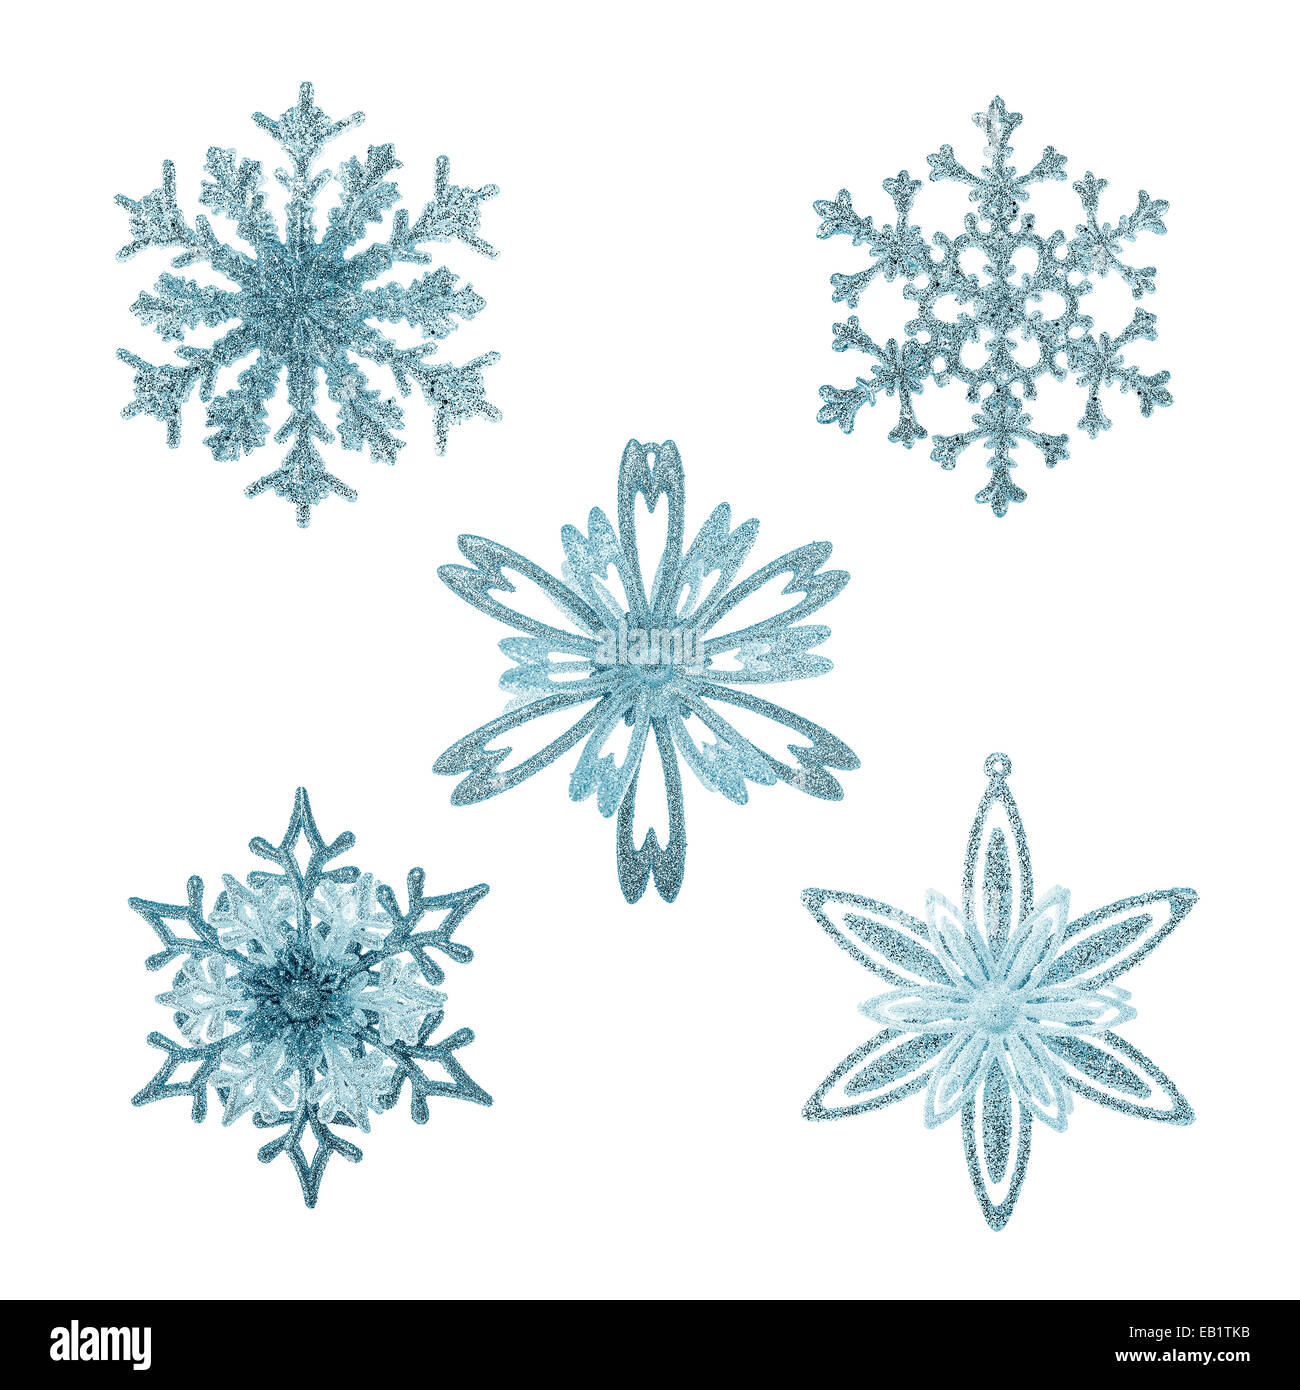 Snowflakes decoration isolated on a white background Stock Photo